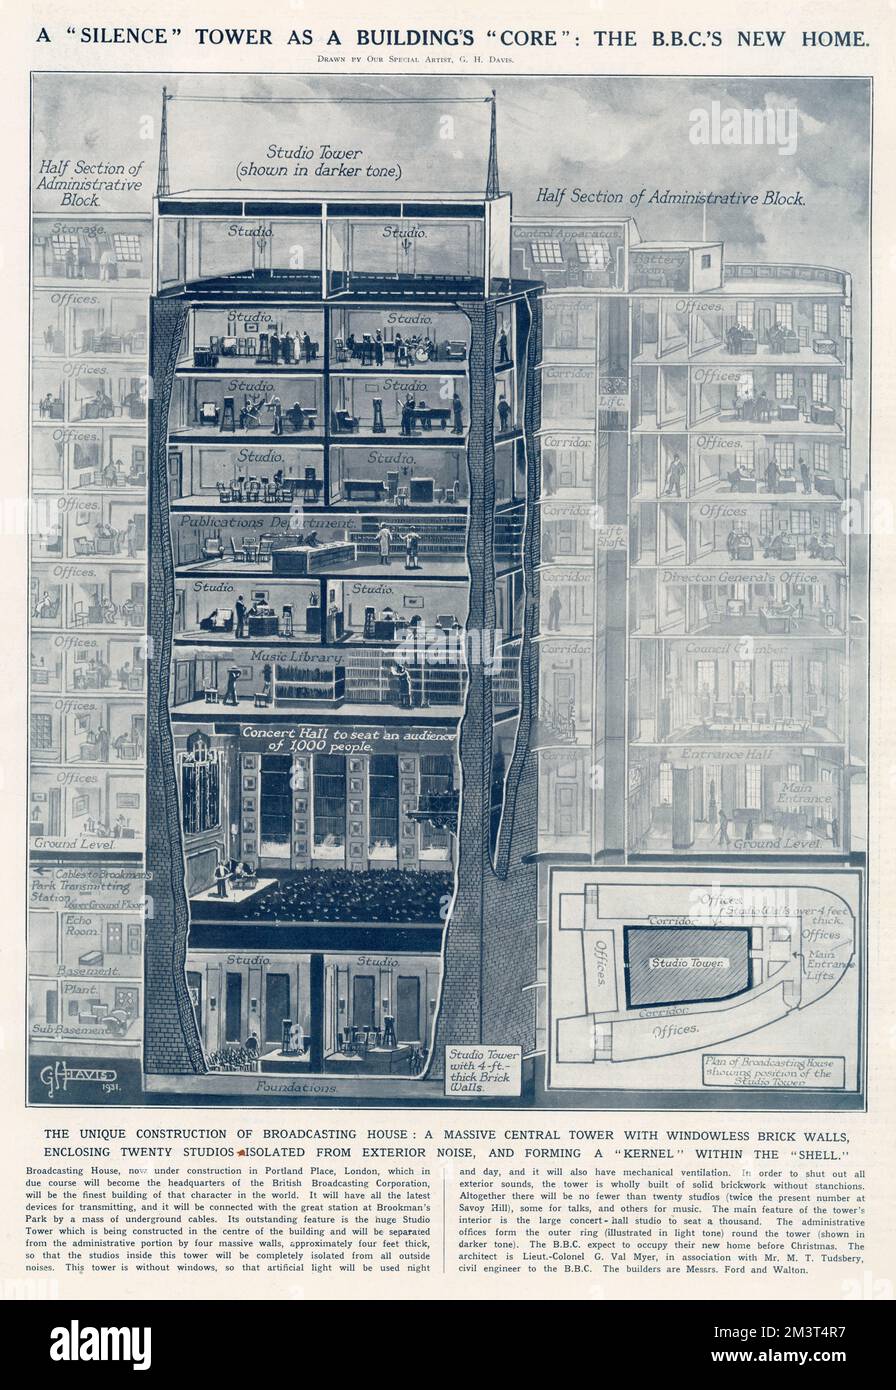 Diagram by G. H. Davis showing the new Broadcasting House in Portland Street, London (B.B.C's headquarters) and what the interior will look like when completed. Stock Photo